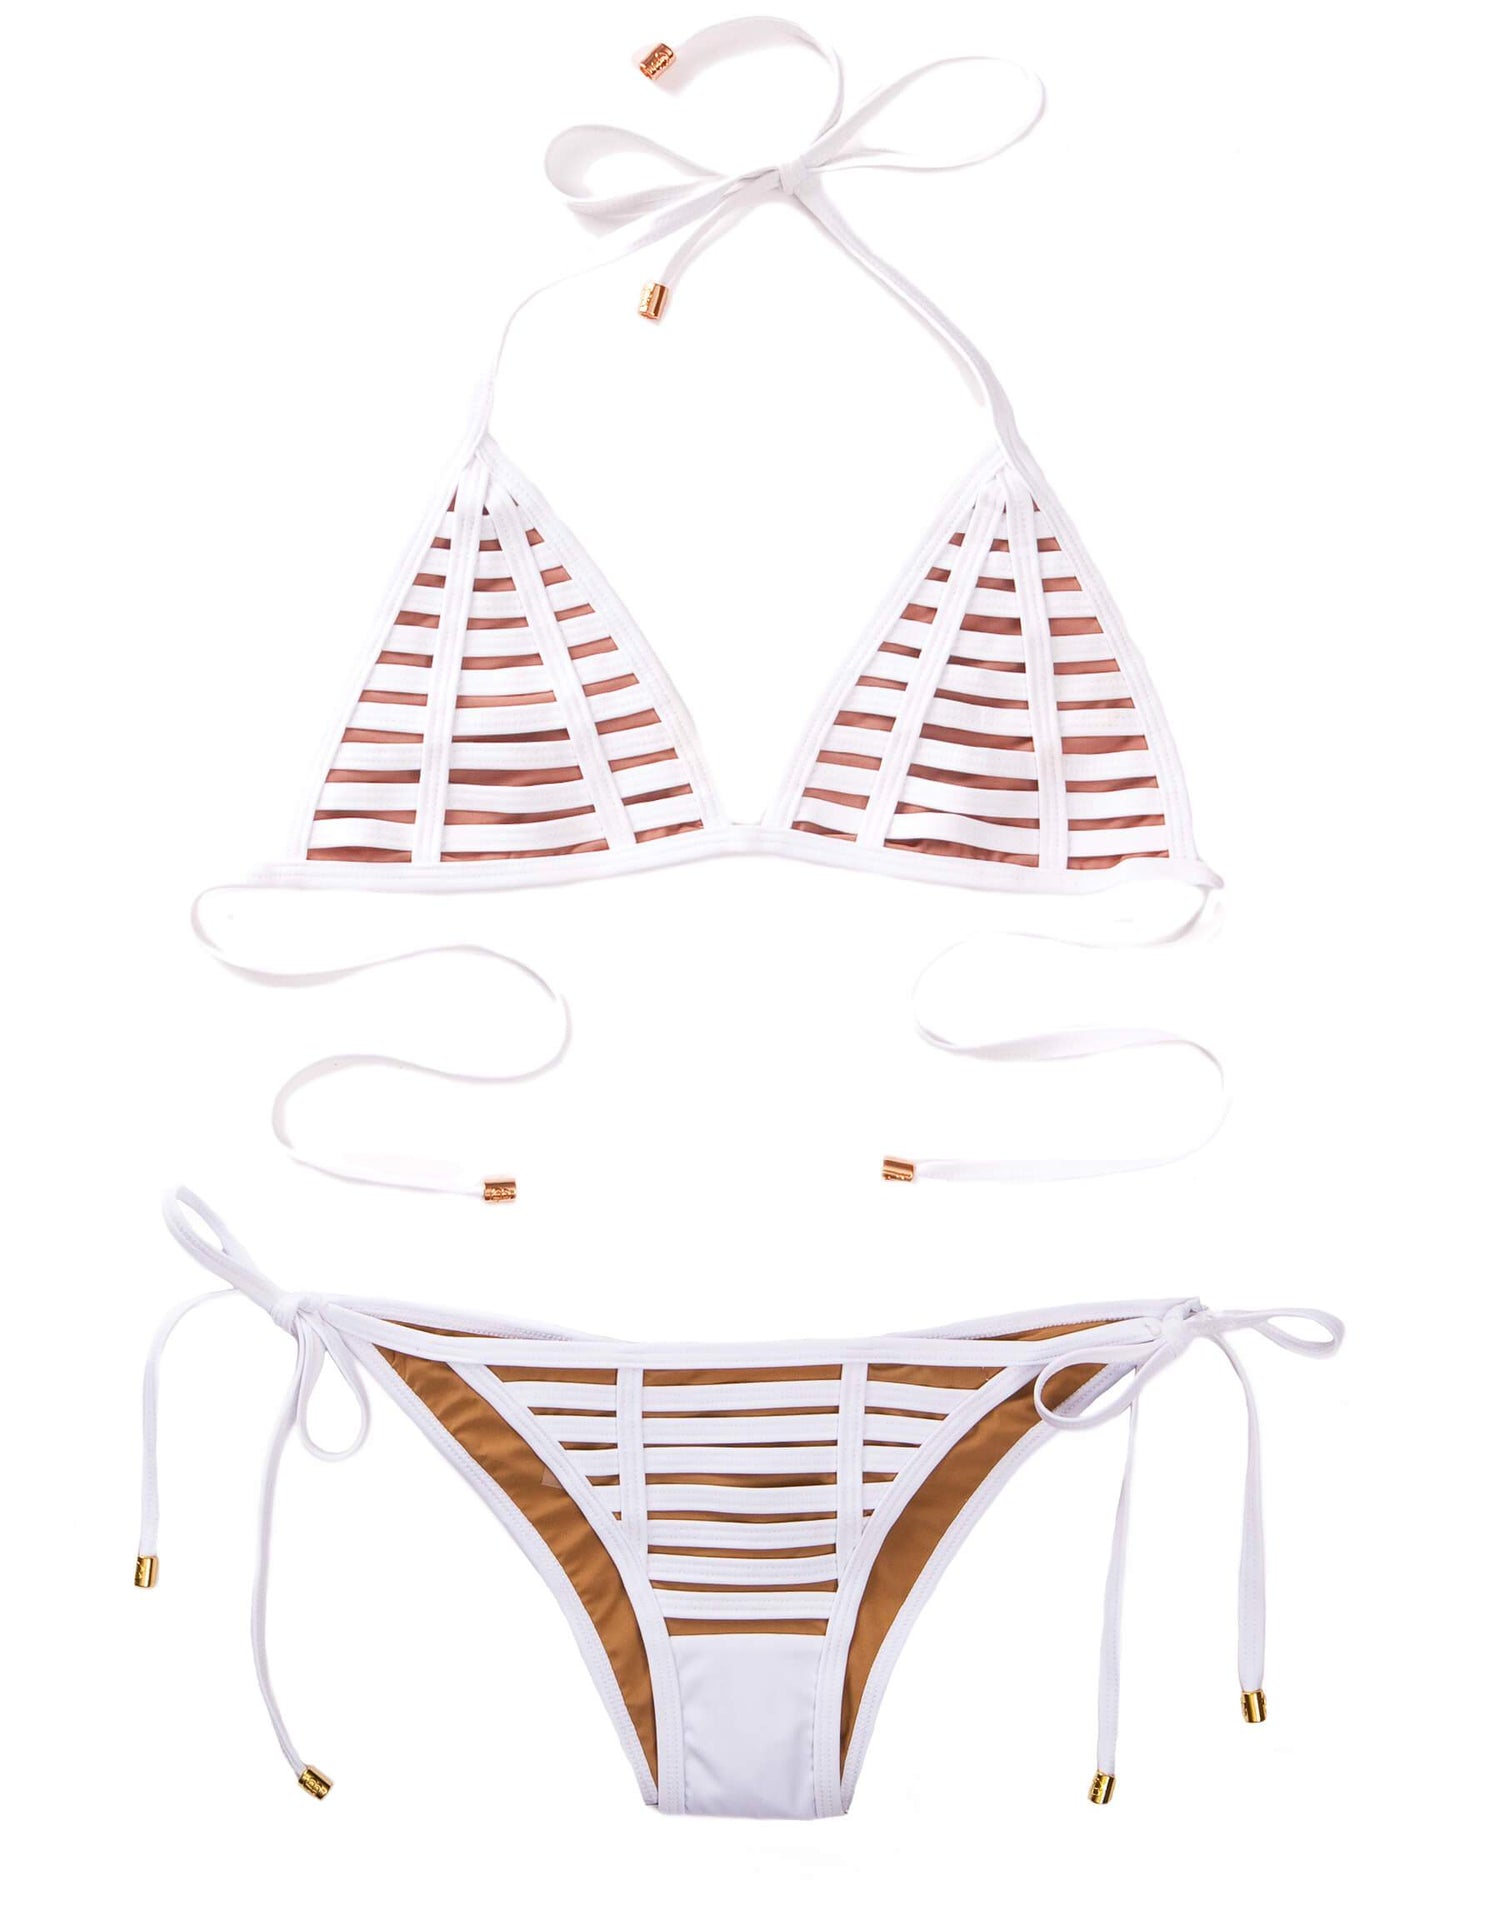 Hard Summer Tie Side Bikini Bottom in White with Rows of Binding & Nude Lining - Product View